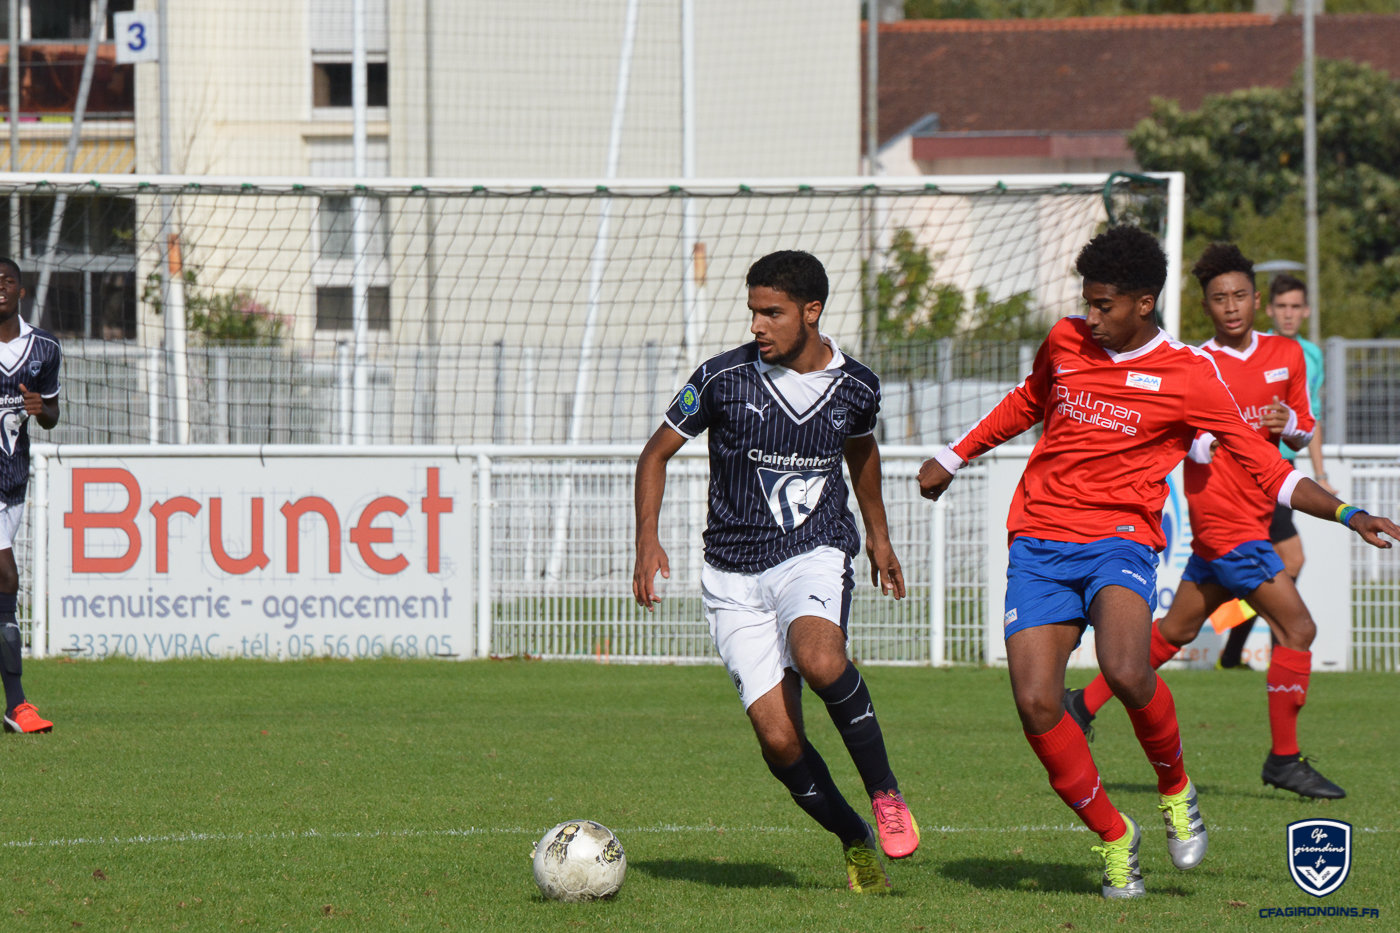 Cfa Girondins : Match nul contre le SAM (0-0) - Formation Girondins 